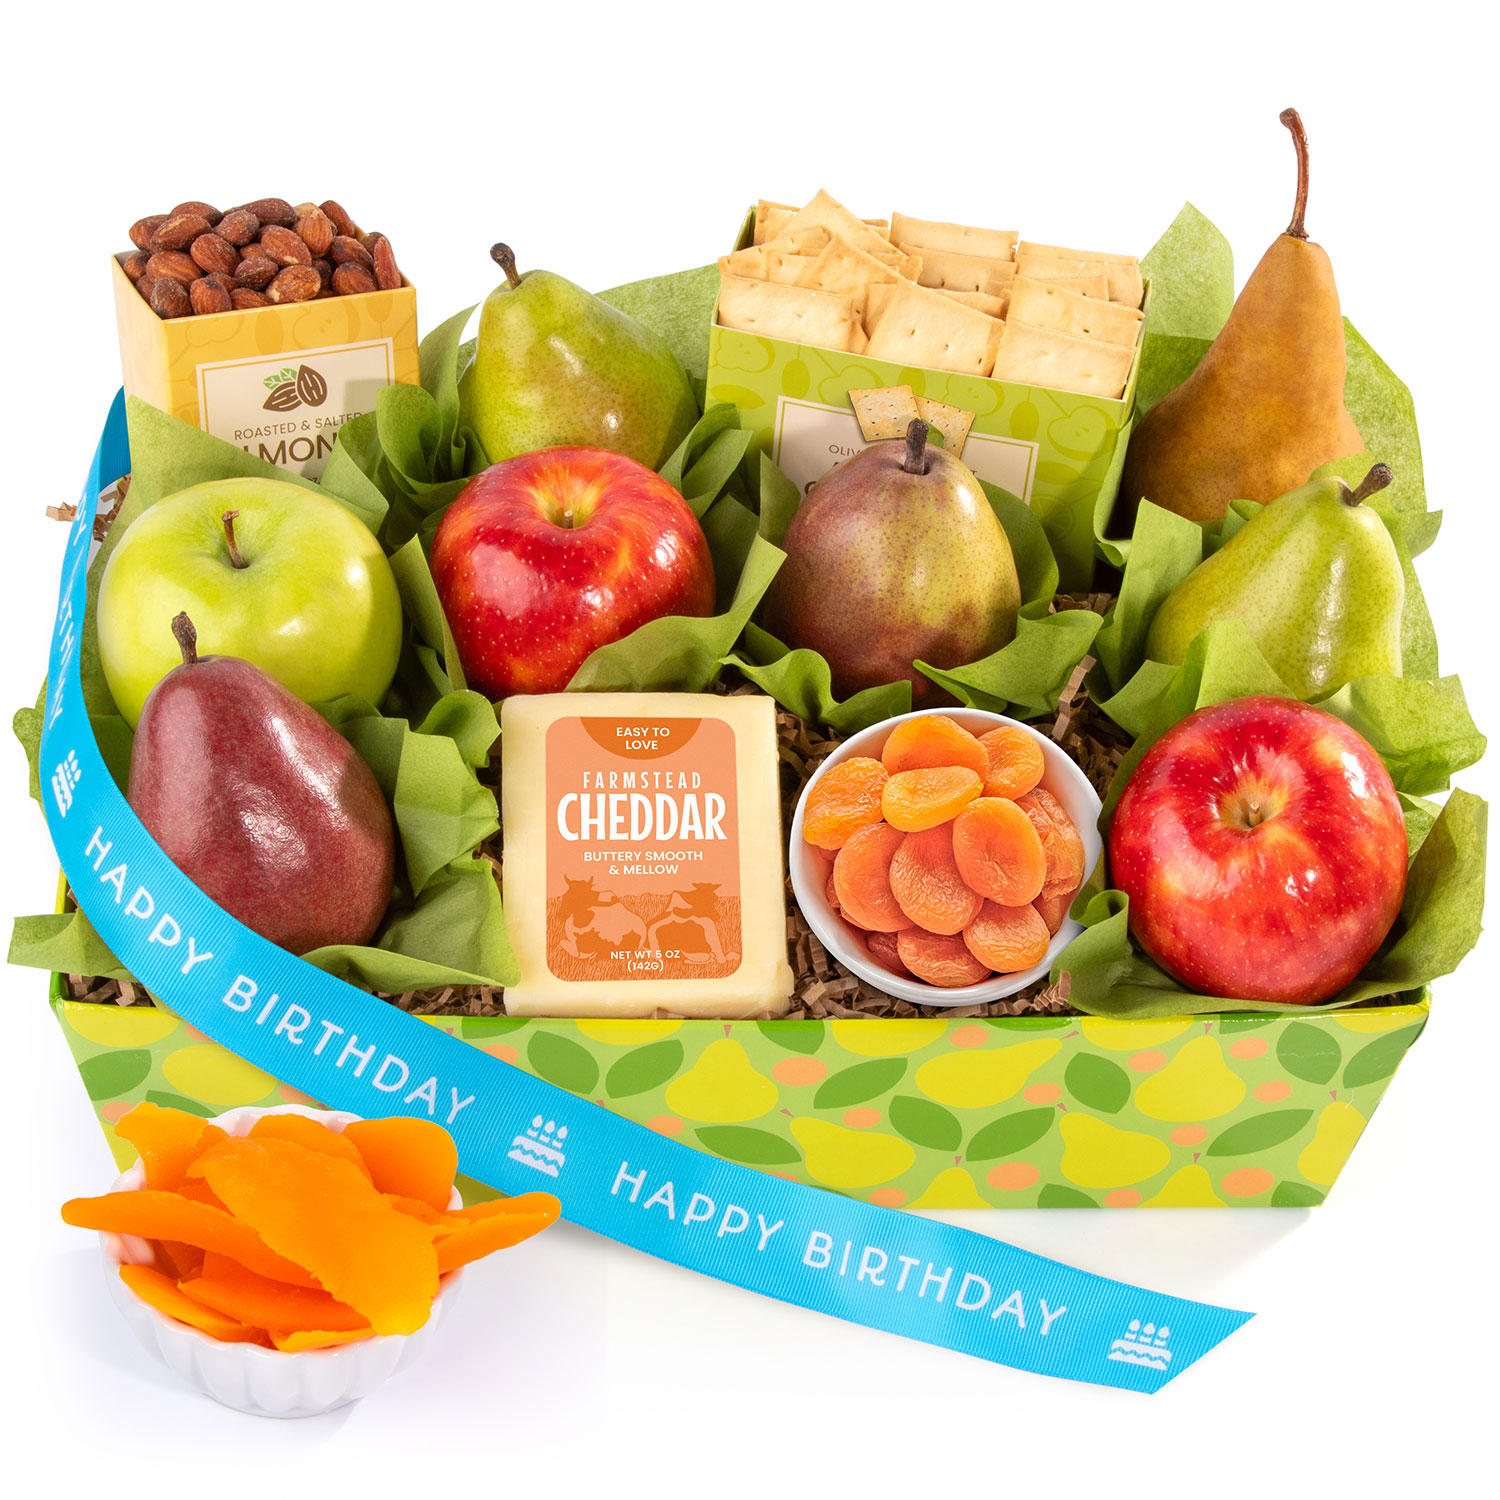 Happy Birthday Fruit and Cheese Gift Basket